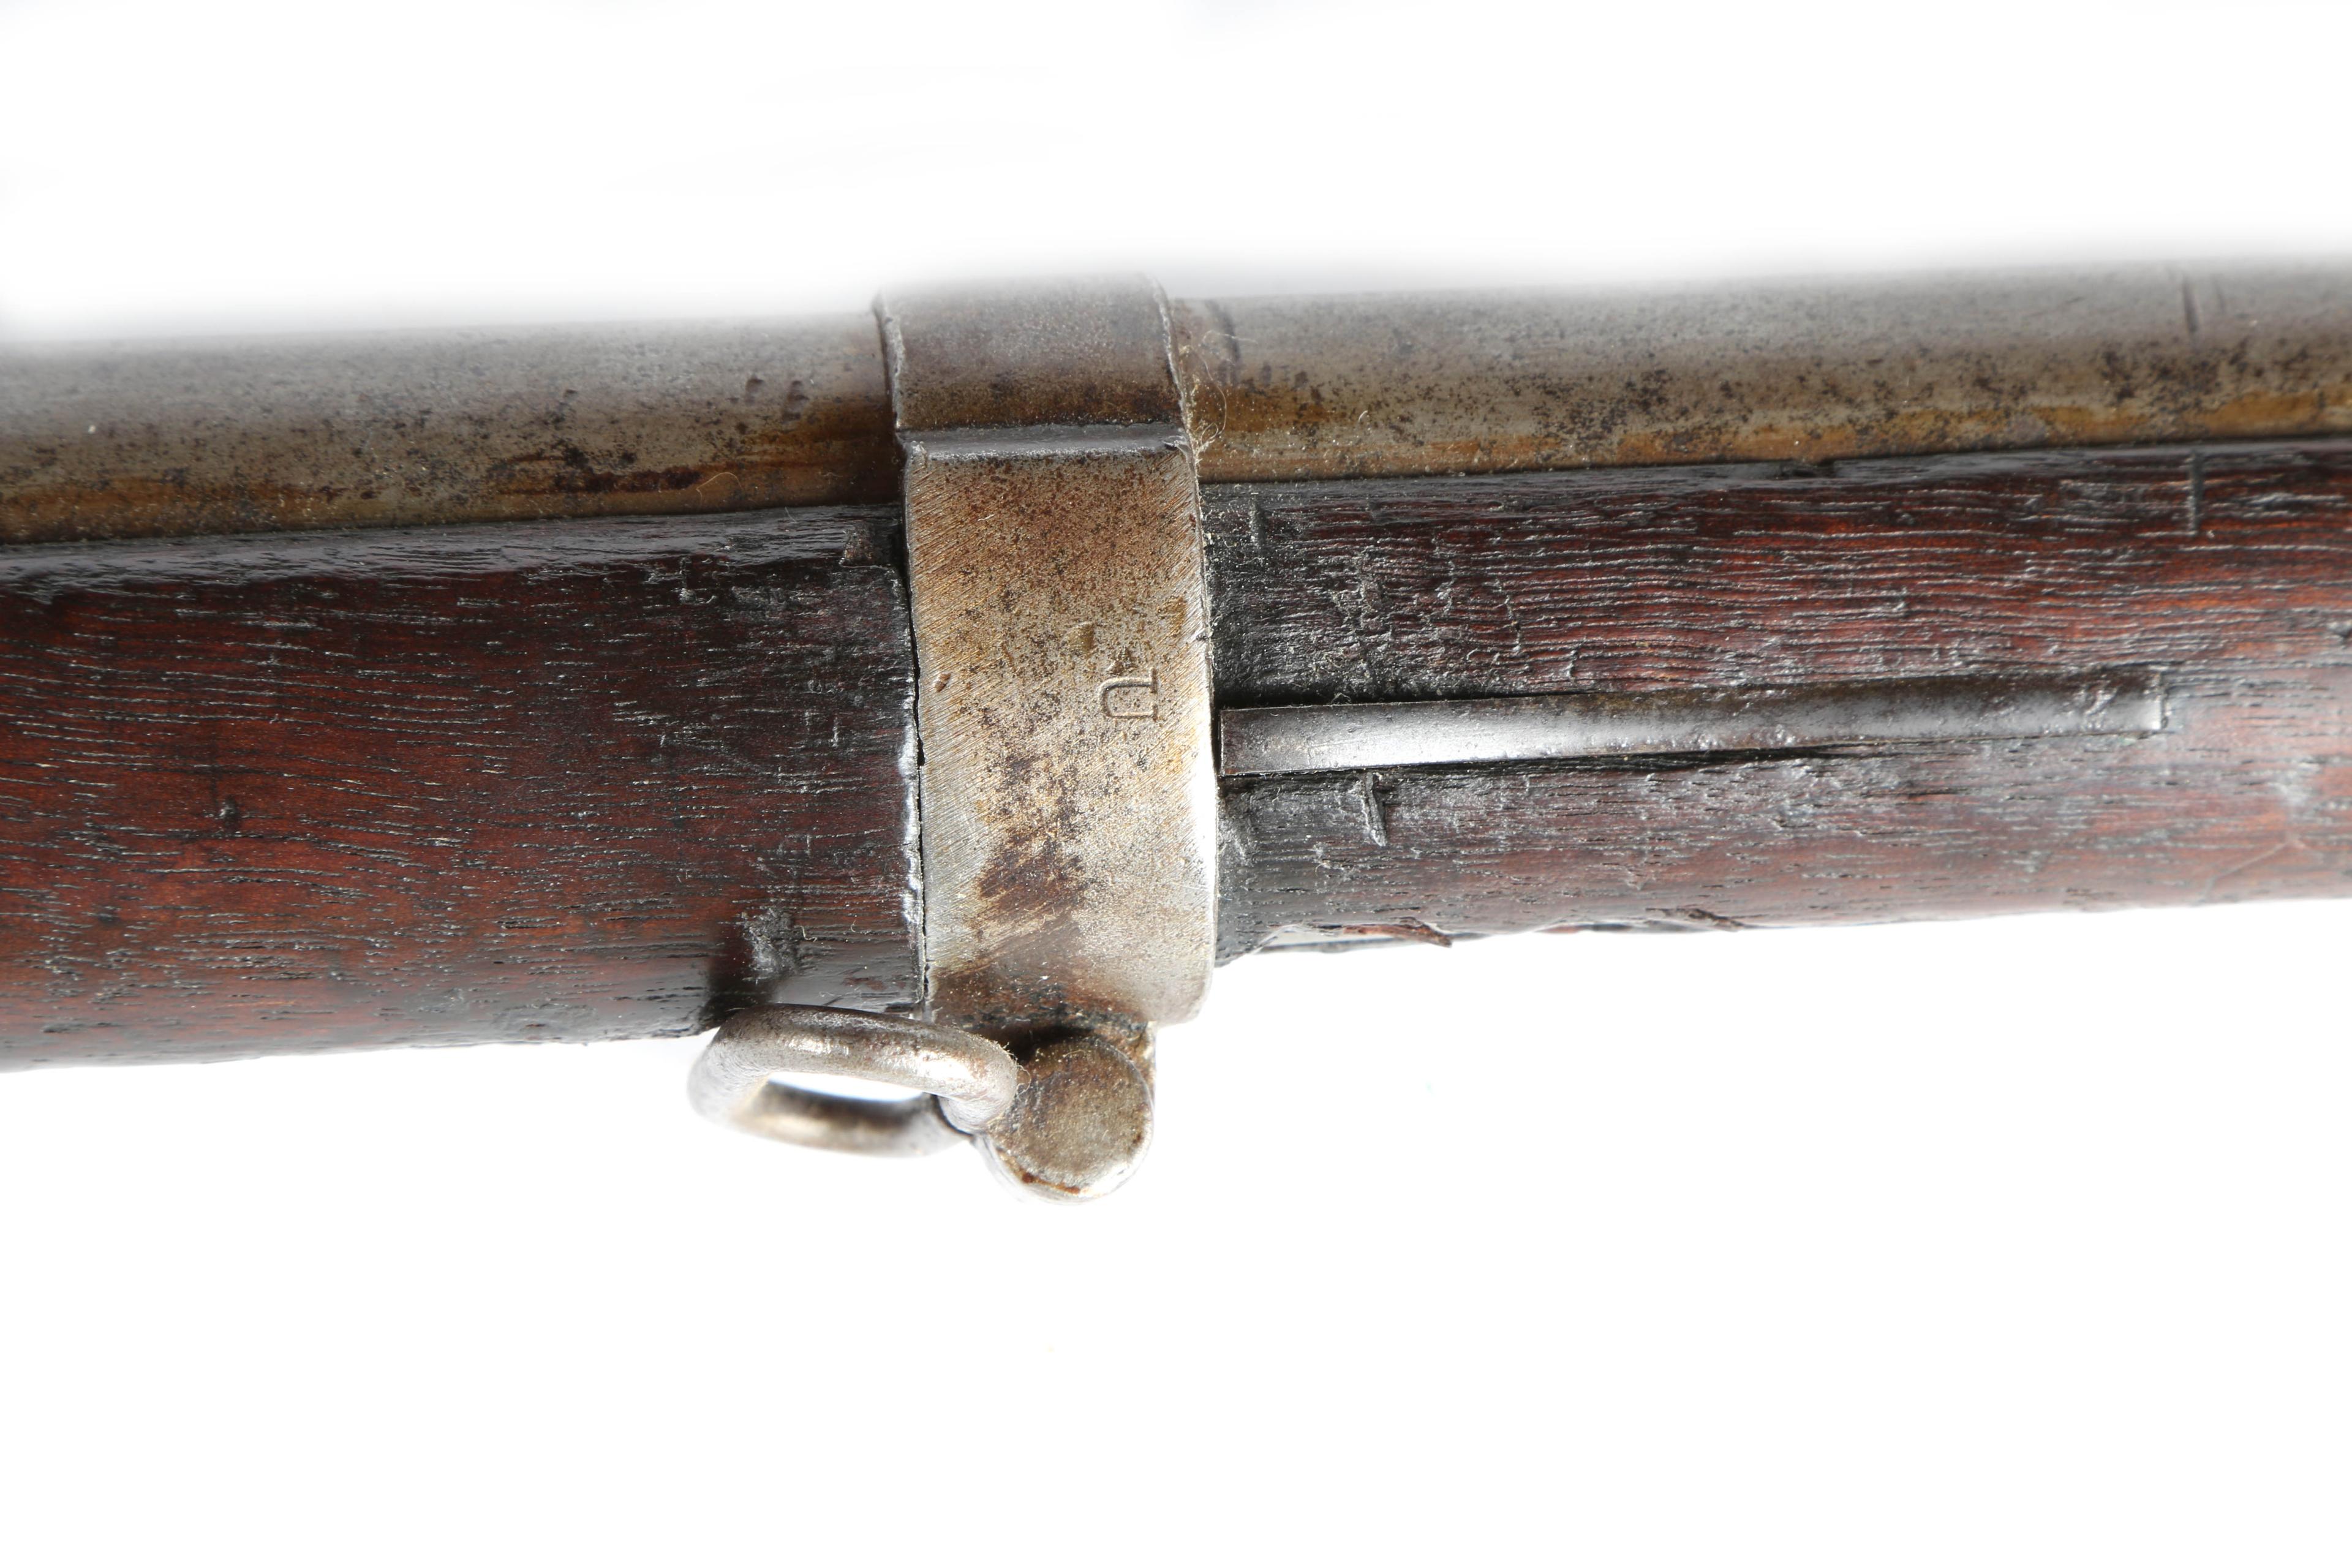 Norwich Arms Co. Model 1861 Contract Rifle/Musket in .58 Caliber